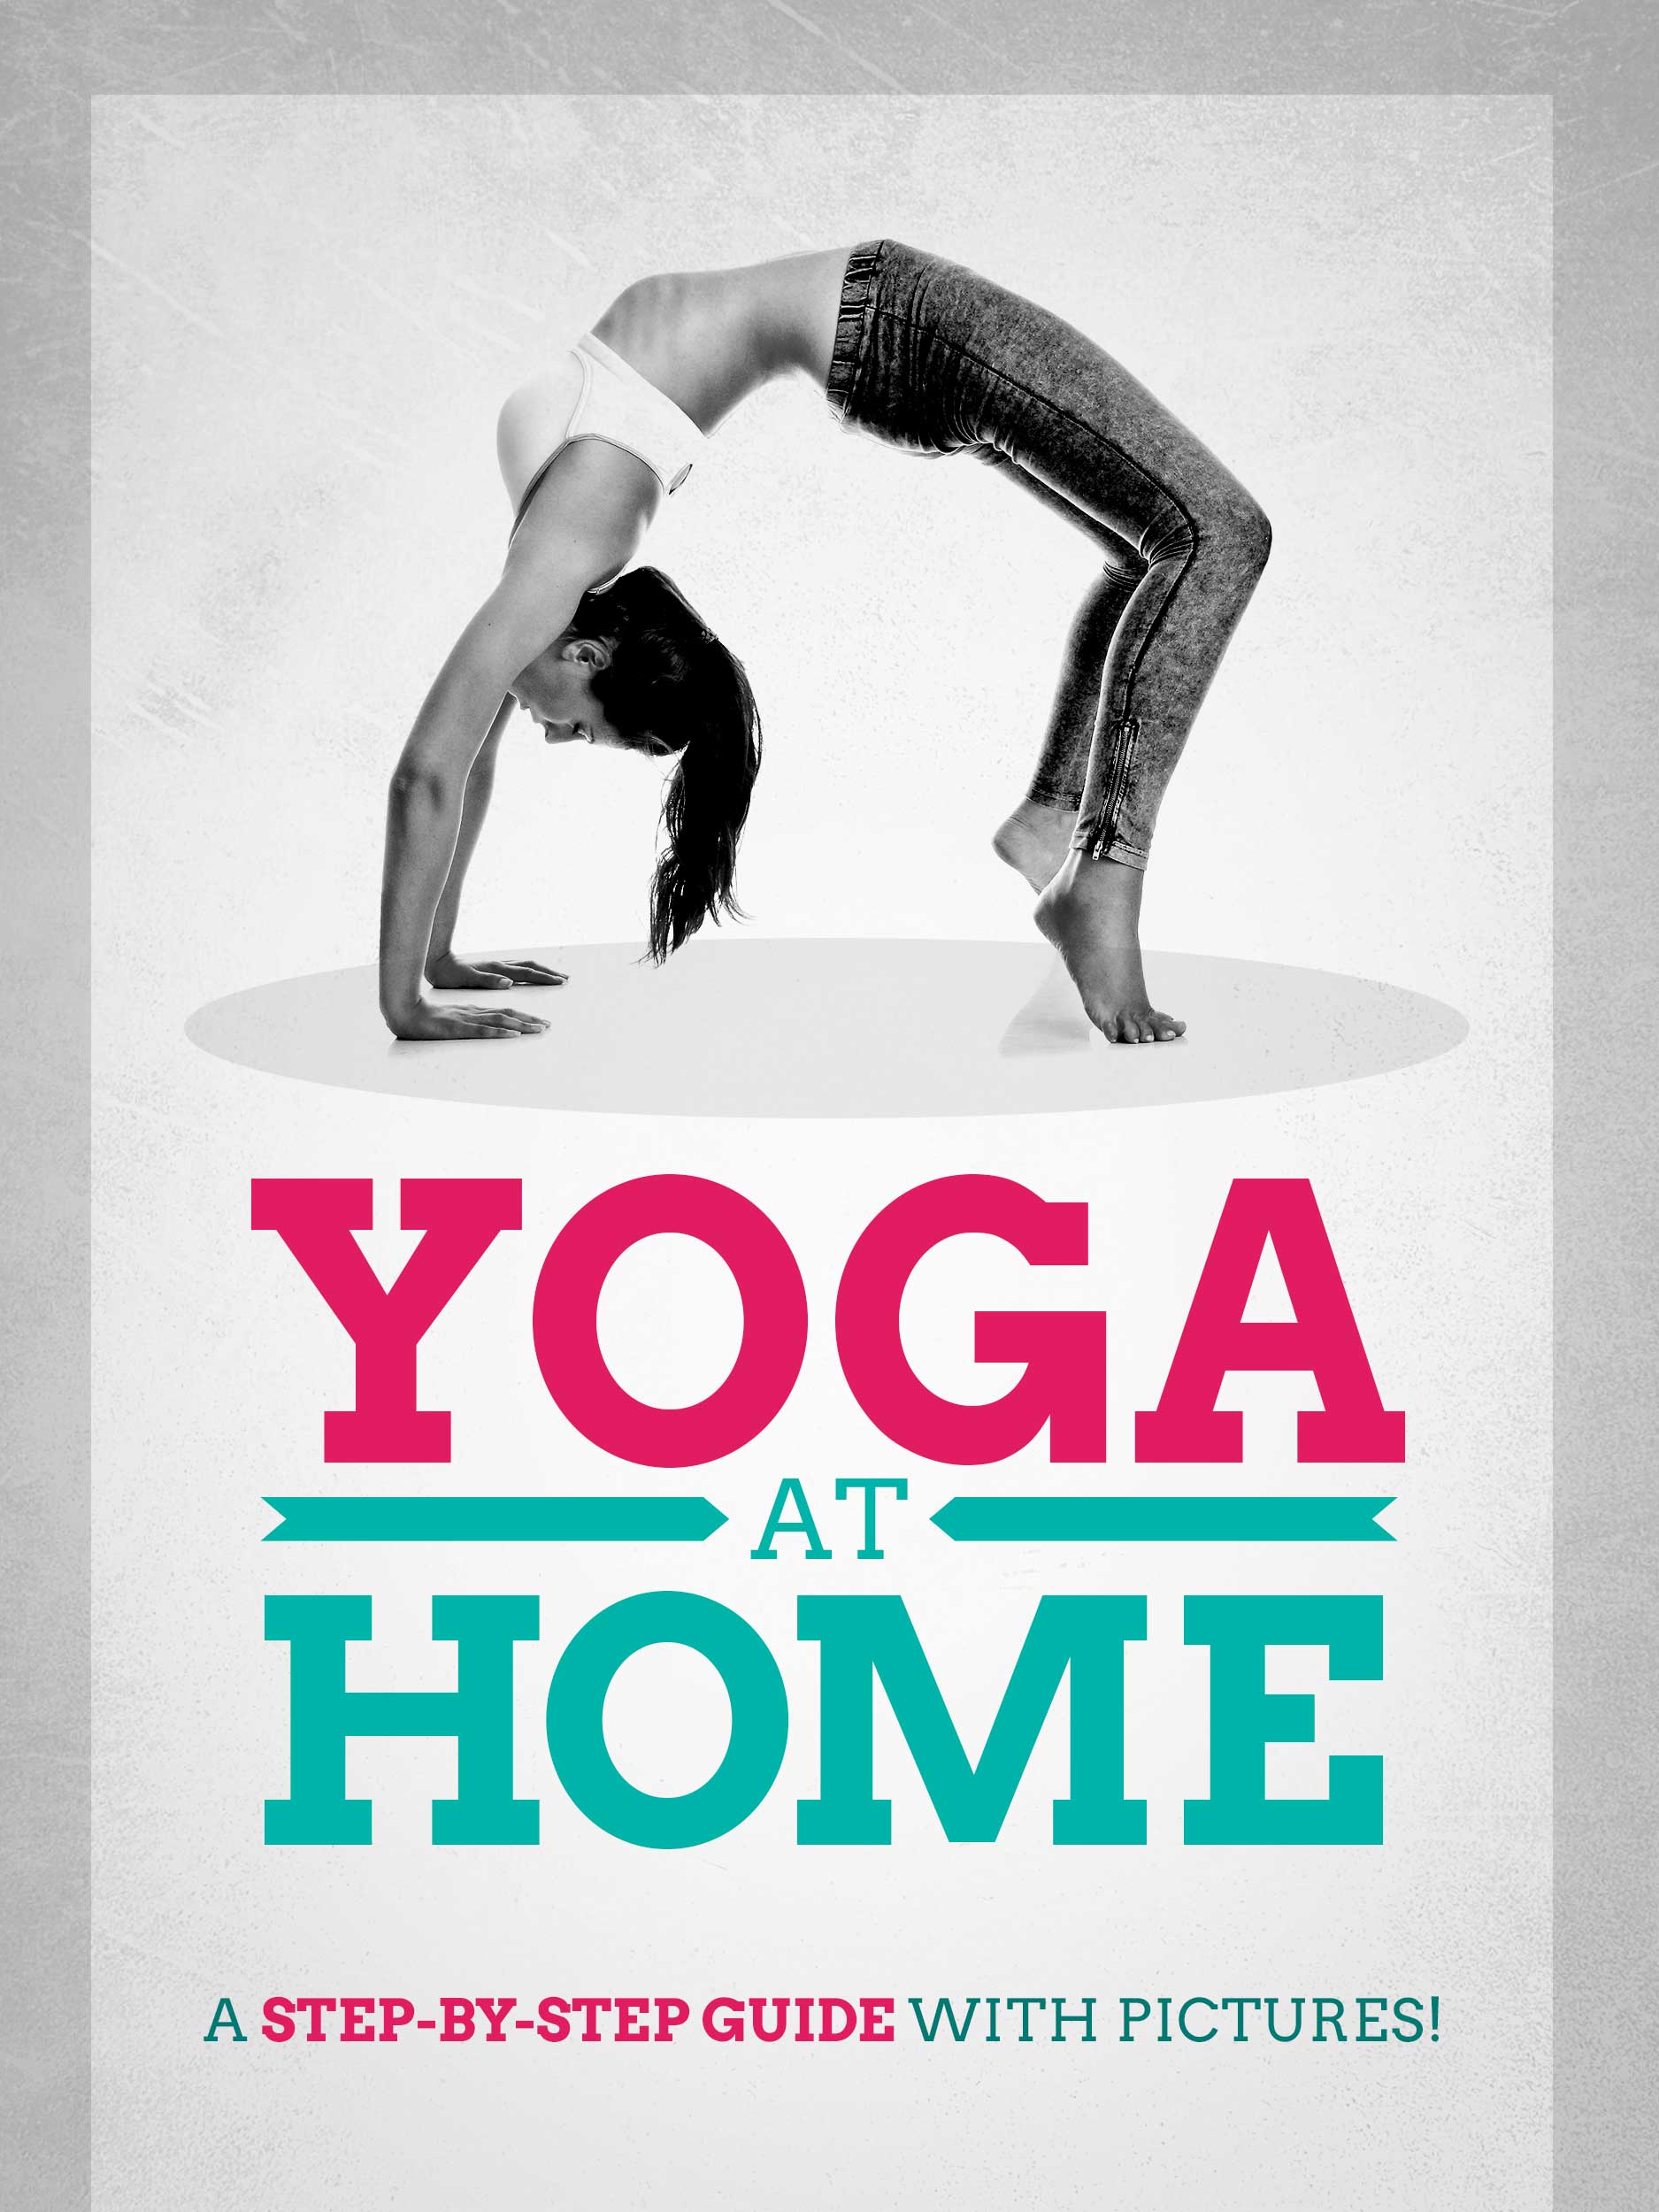 FREE: Yoga At Home: A Step-By-Step Guide With Pictures! by Henry J